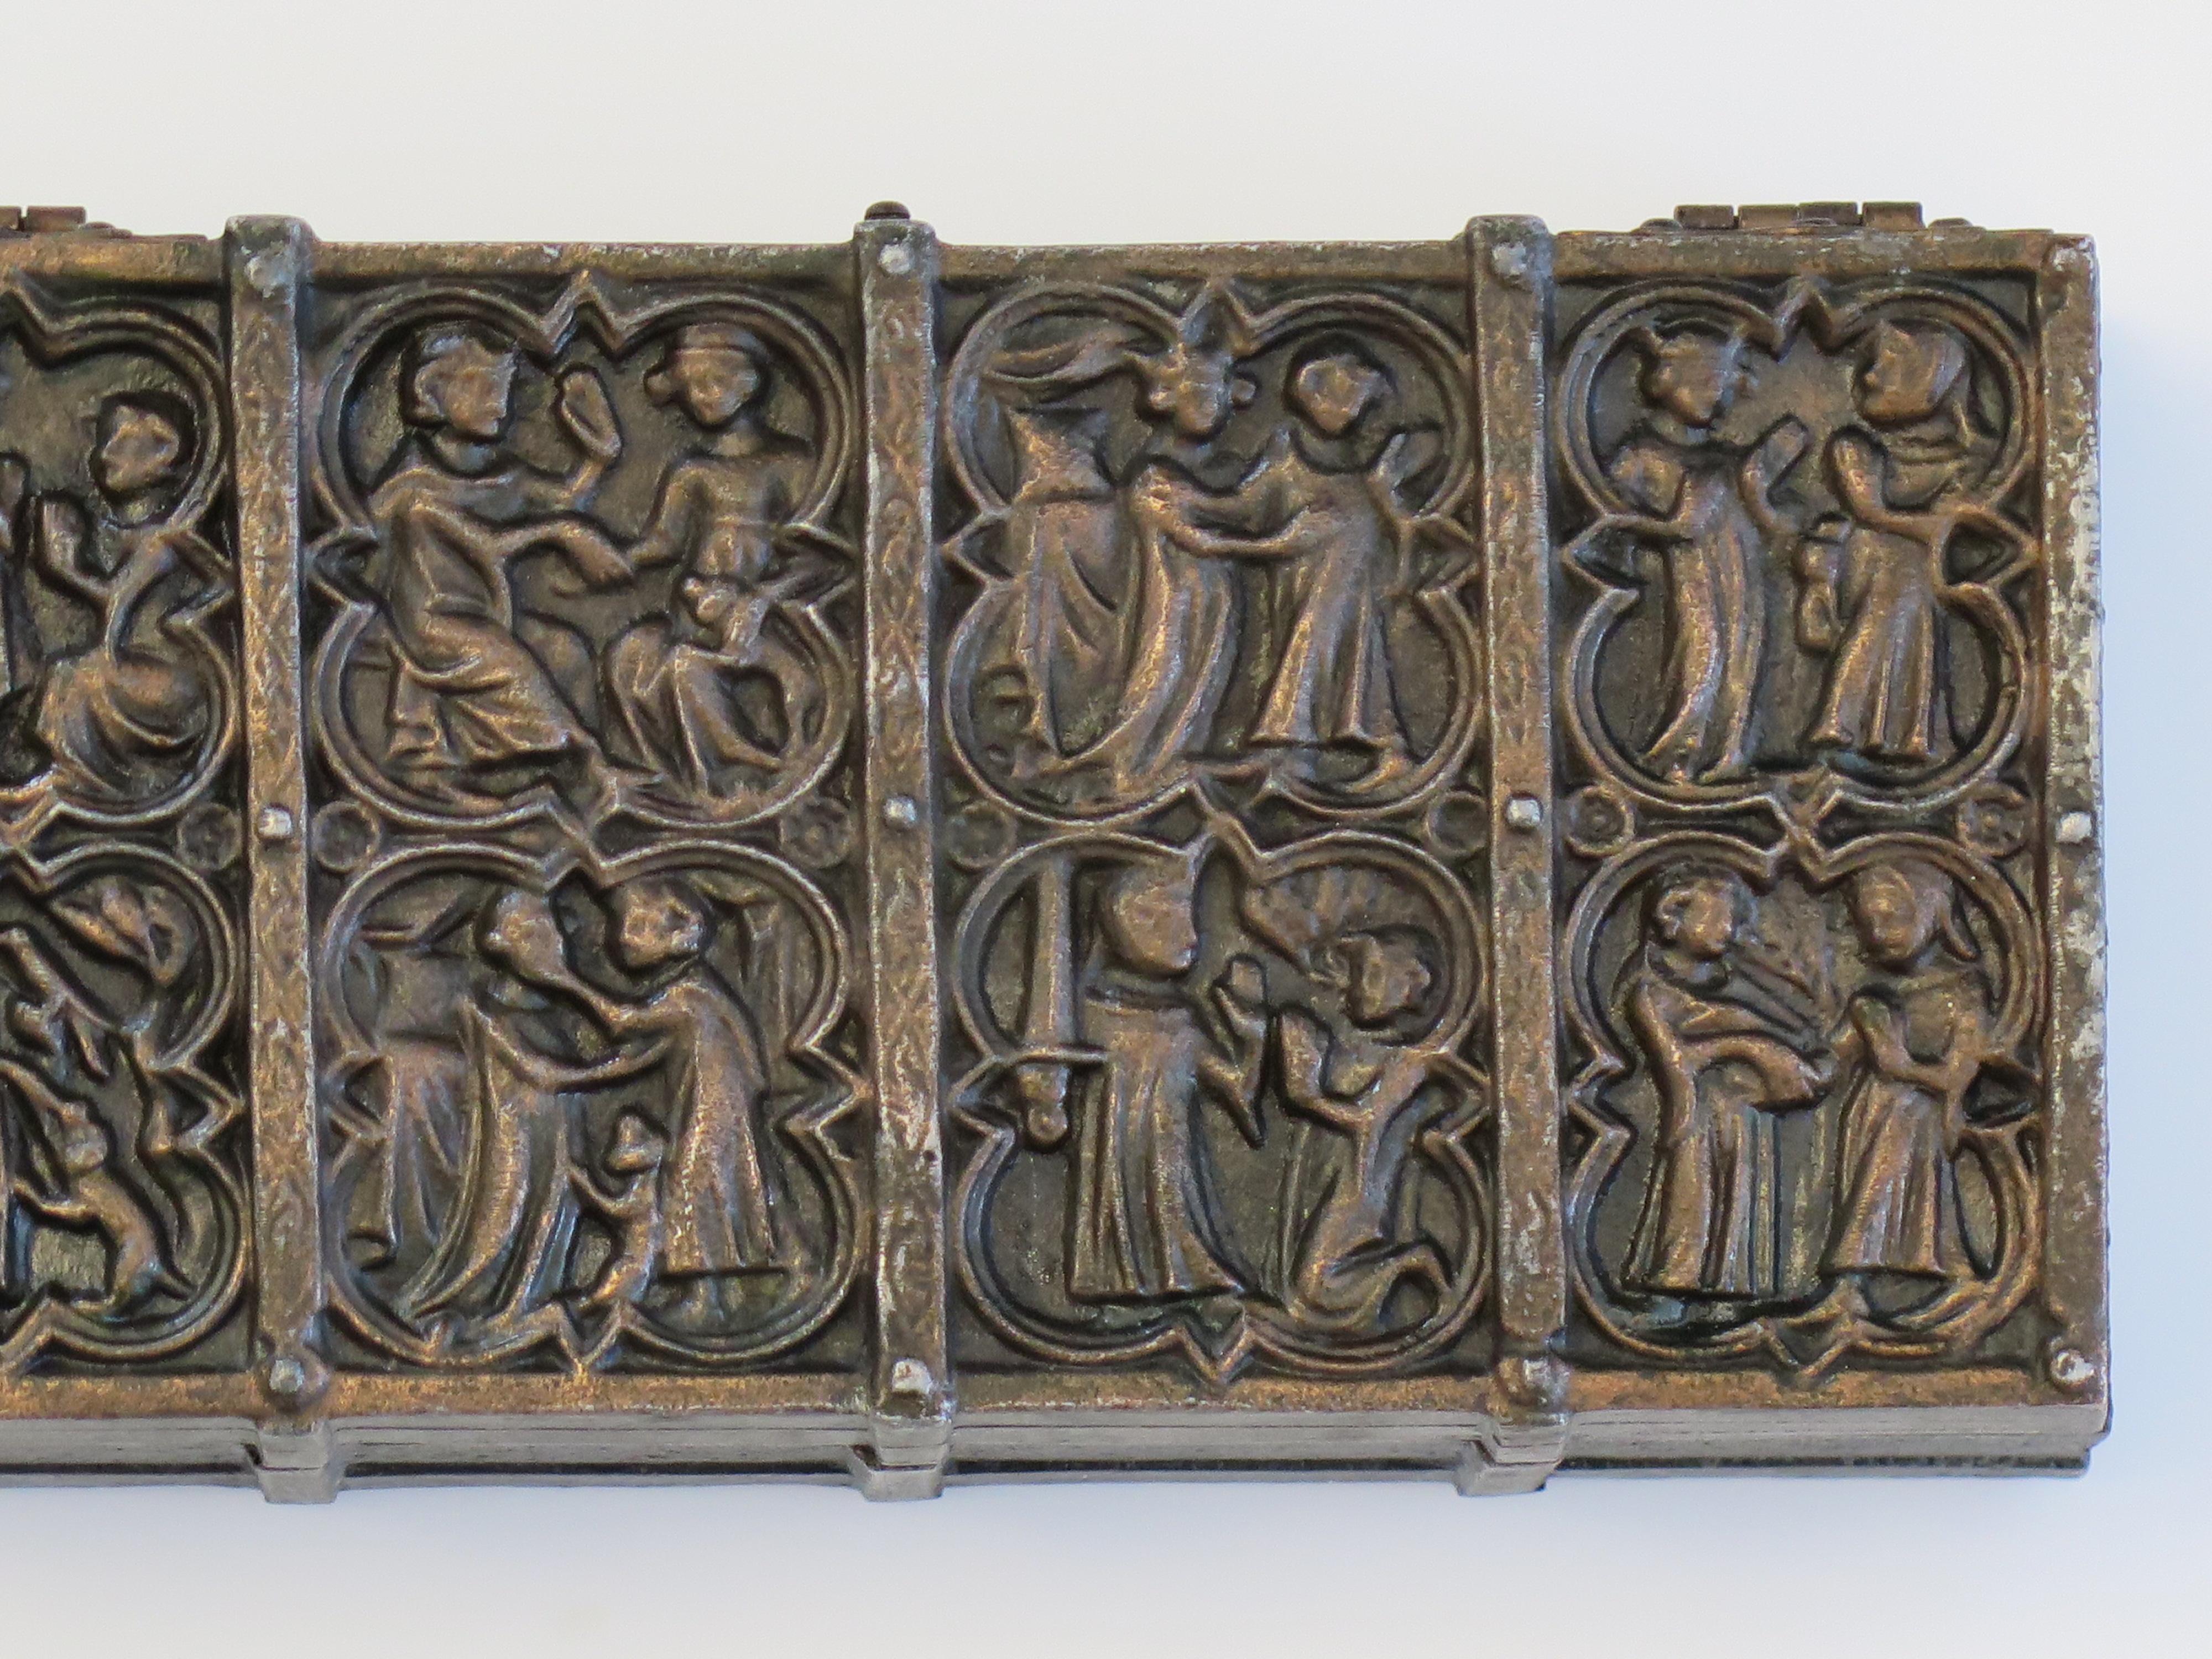 This is a cast bronze metal box modelled as a casket with a wood liner and  depicting medieval scenes. We date this box to the late 19th Century. 

The box is made of a cast metal (bronze) shaped in the form of a rectangular casket with small feet